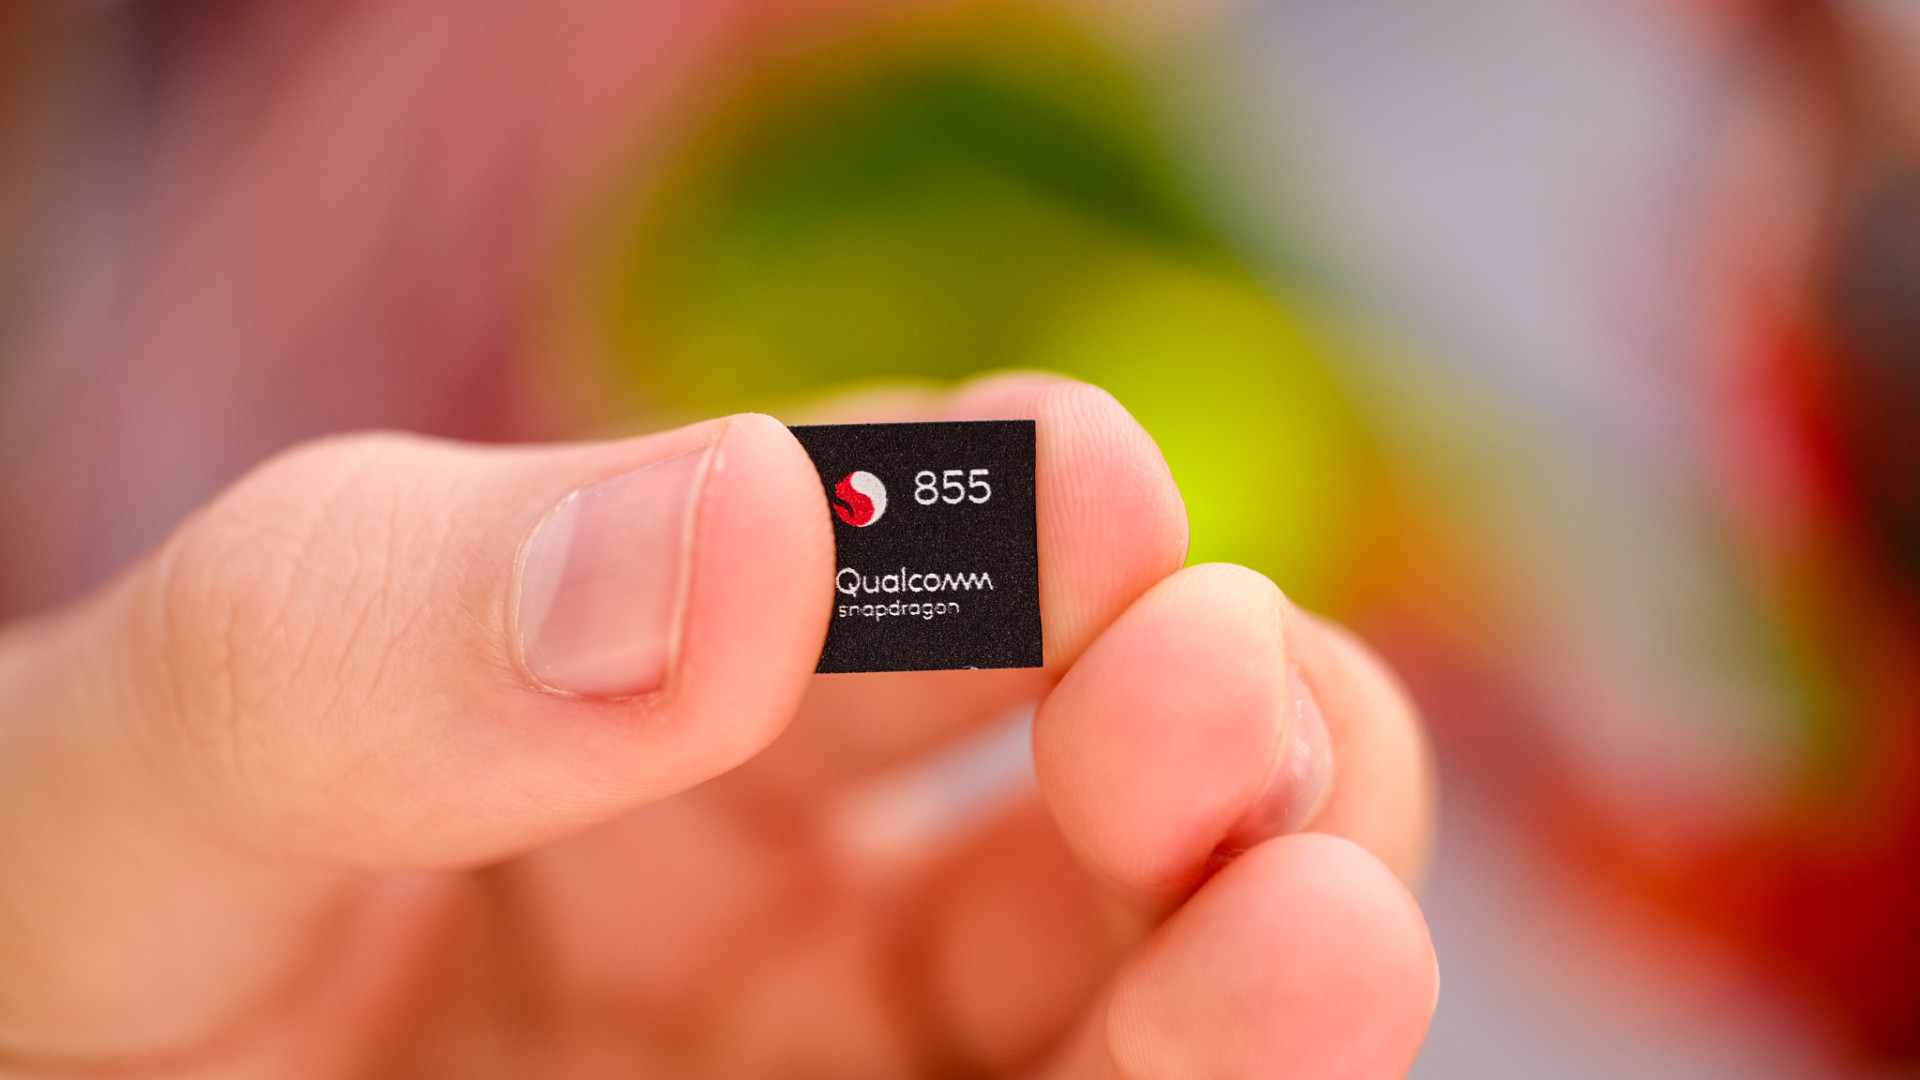 Snapdragon 855 chip in hand